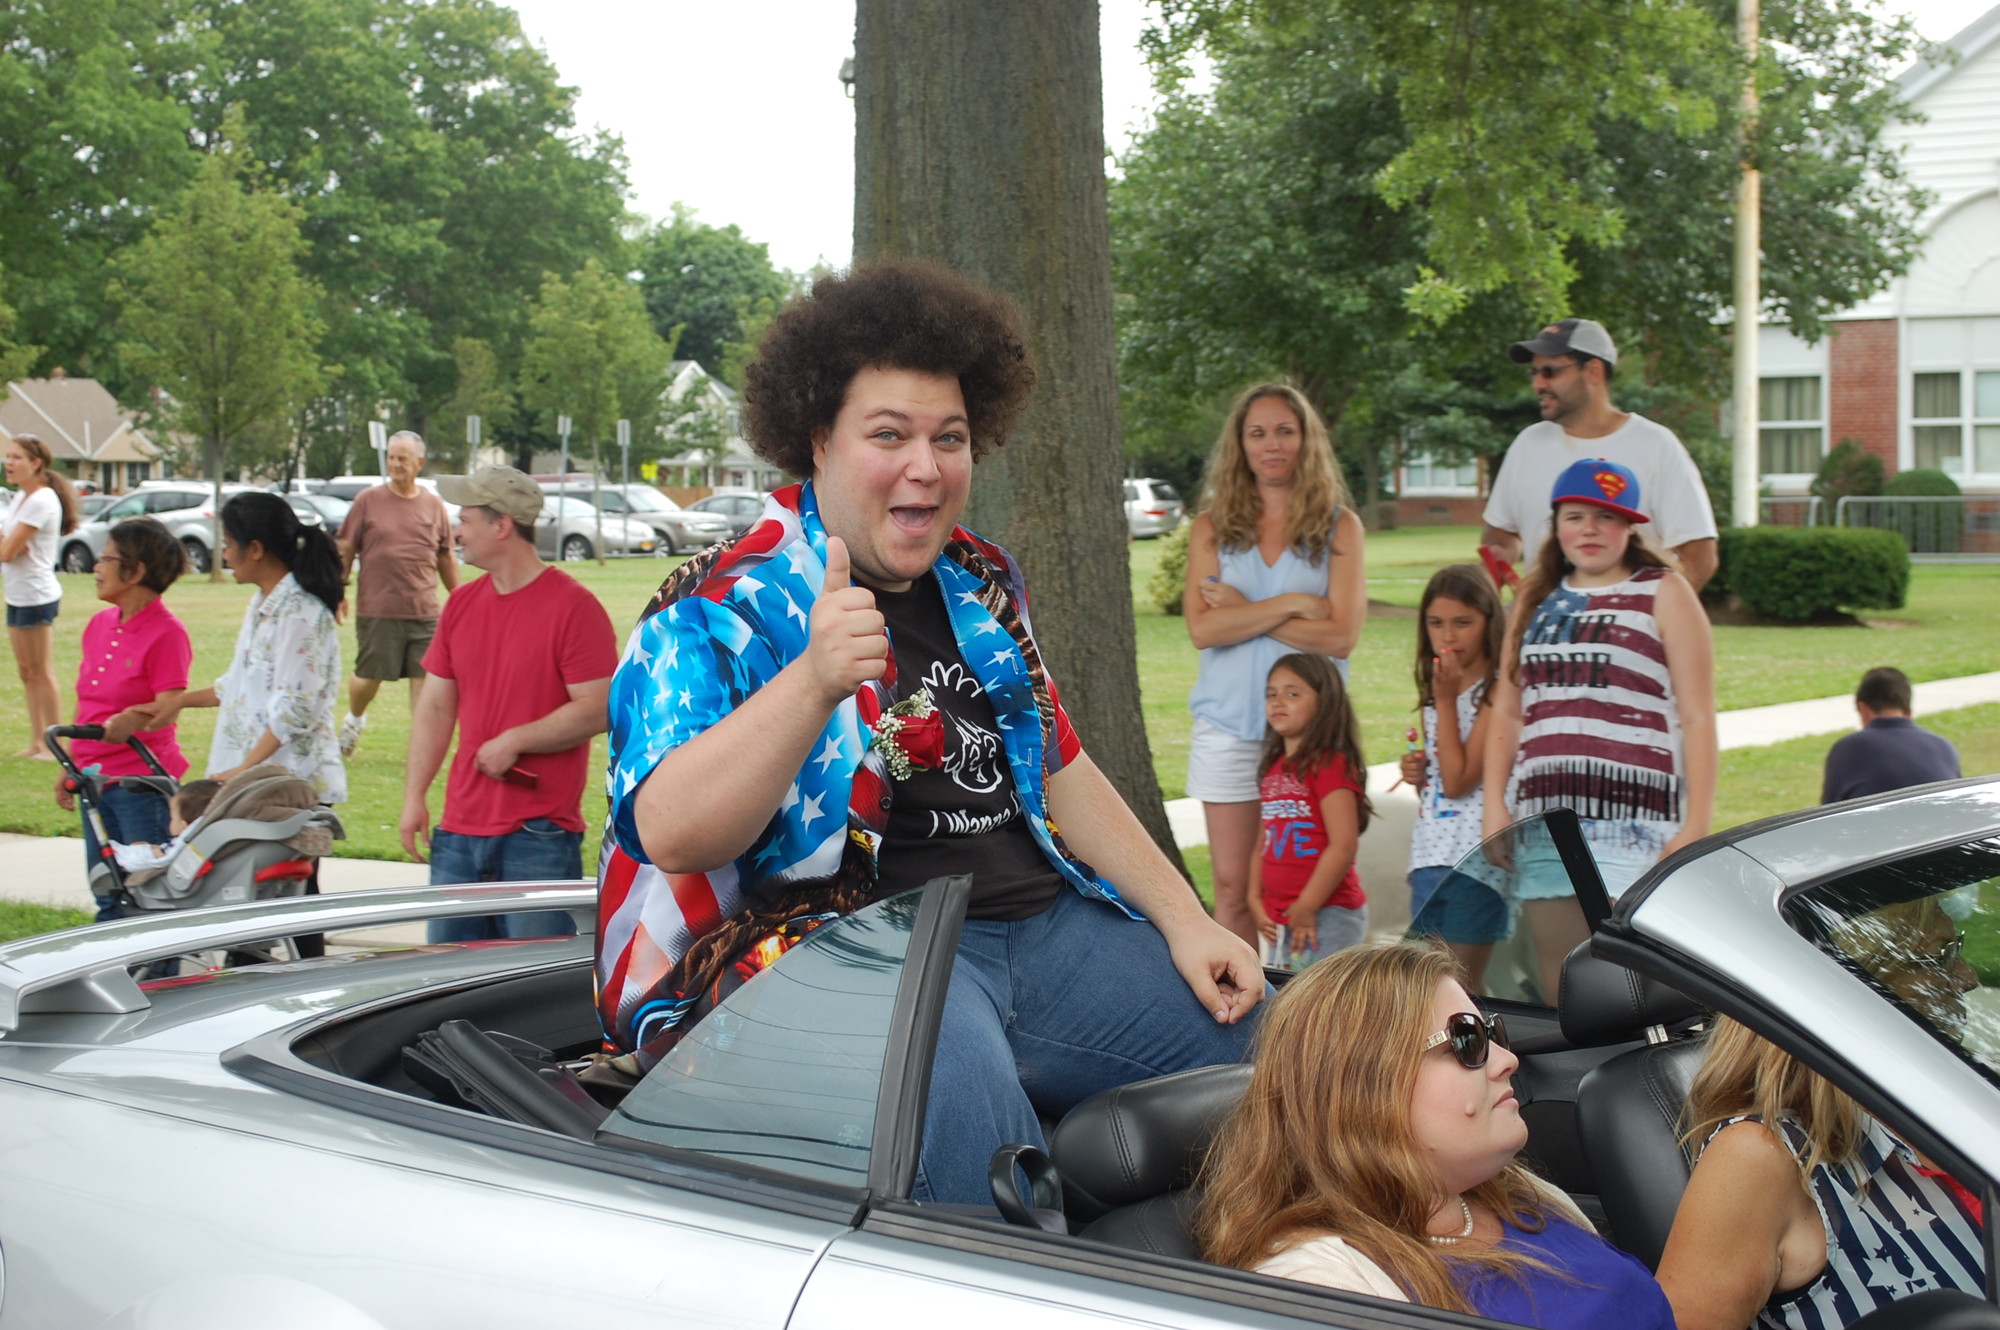 Former American Idol contestant and Wantagh native Adam Ezegelian sang the national anthem after the parade.